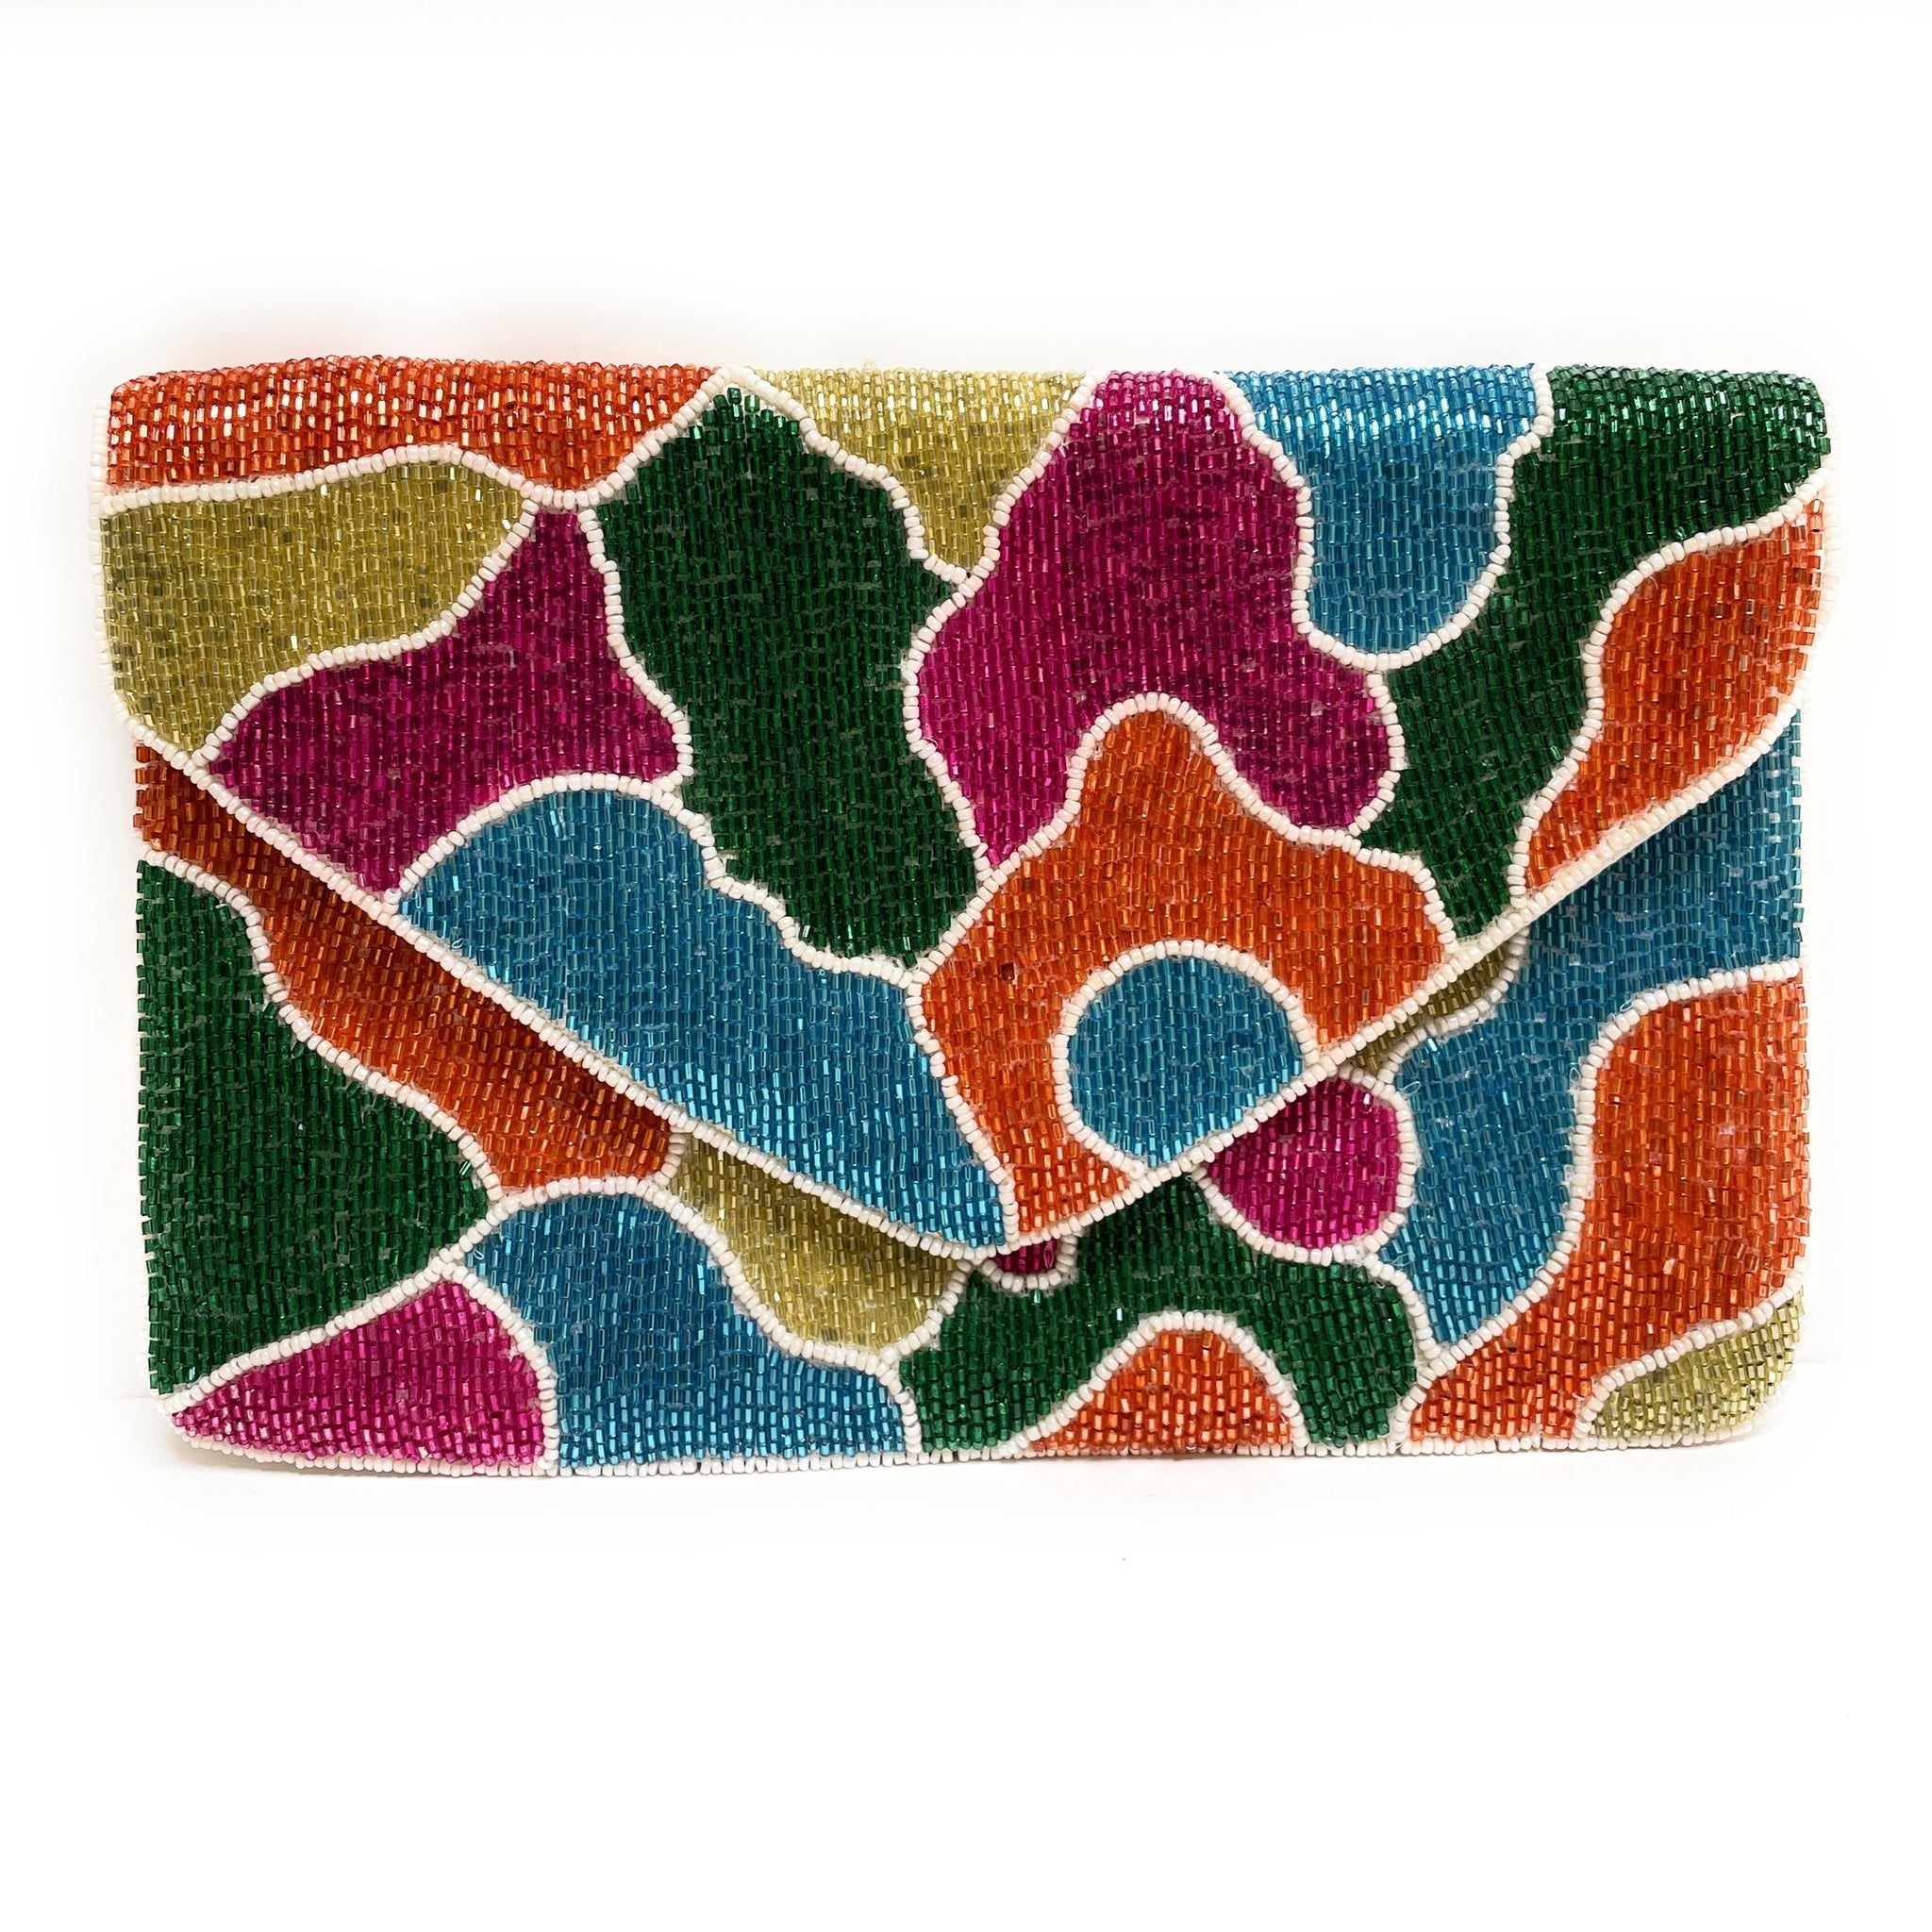 Master Piece Crafts Multicolor Beaded clutch, Party Wedding Clutch,  Bag,Purse, Beautiful Gift Item, Shoulder Bag